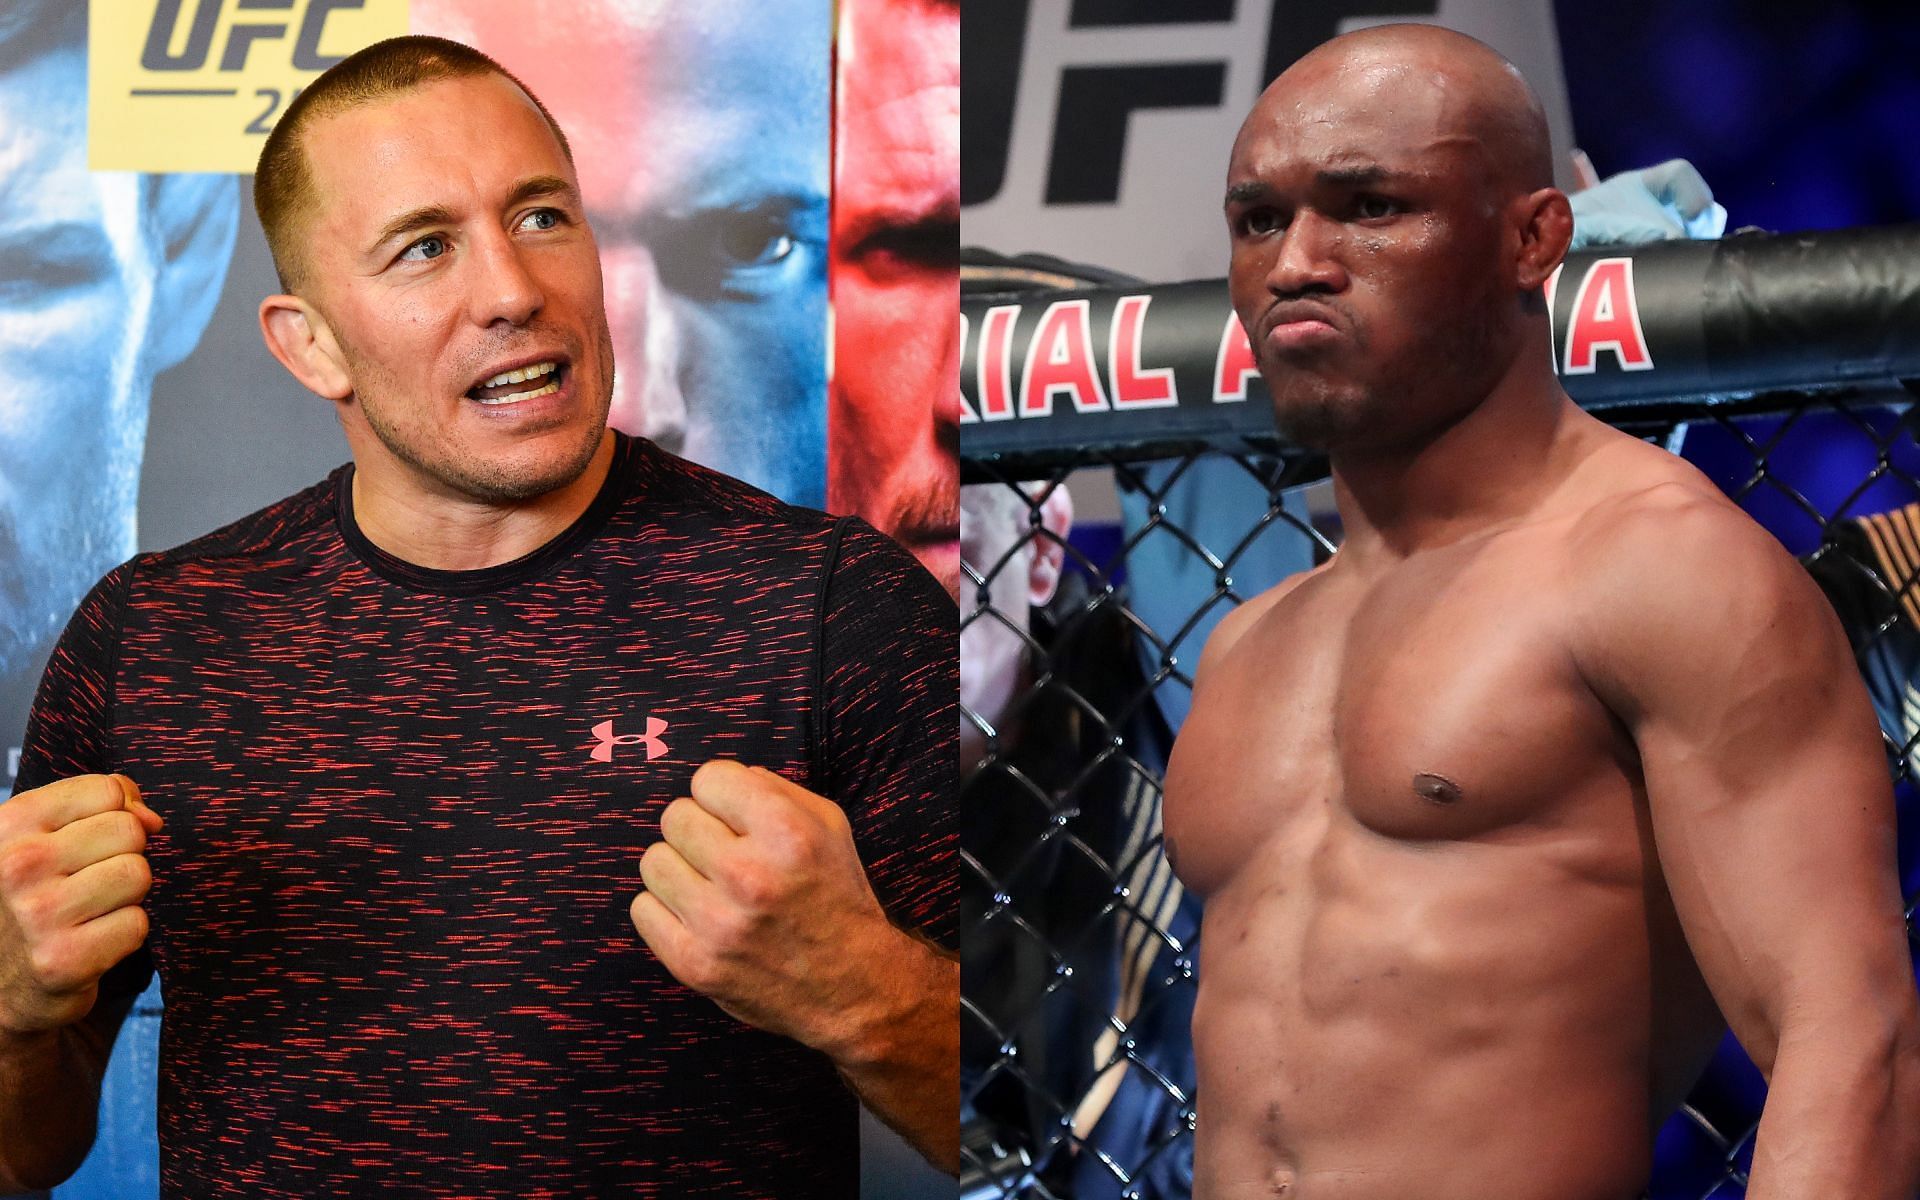 Georges St-Pierre (left) and Kamaru Usman (right) (Images via Getty)